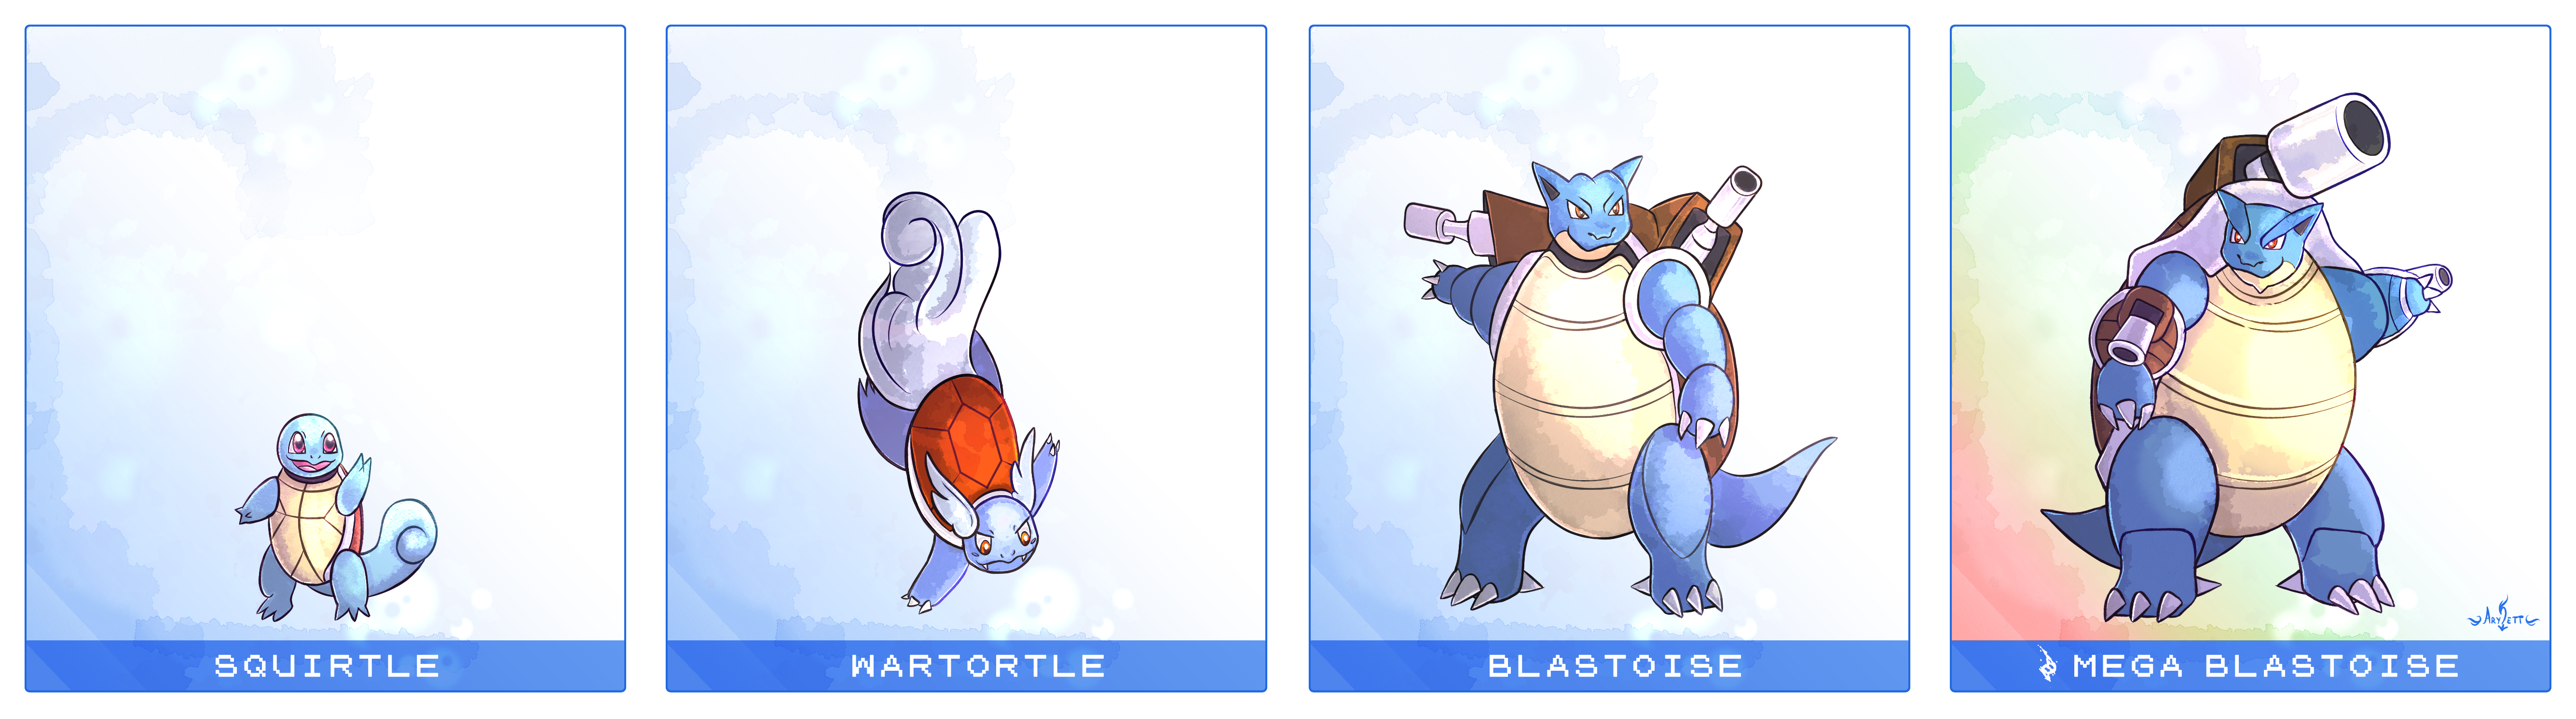 Pokemon Line #3 - Squirtle Line.png